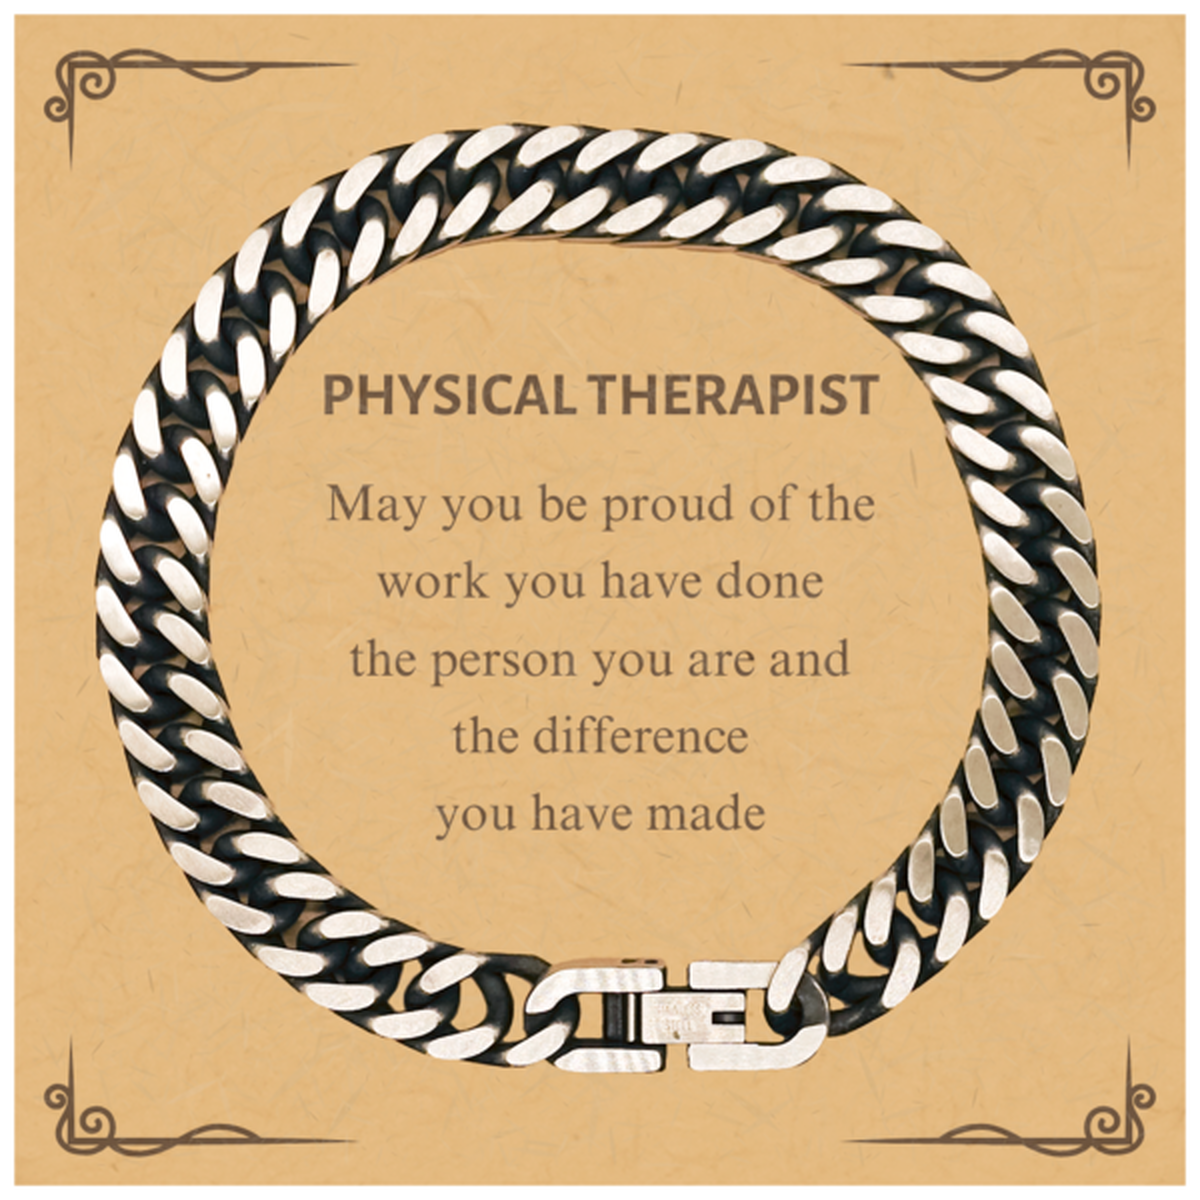 Physical Therapist May you be proud of the work you have done, Retirement Physical Therapist Cuban Link Chain Bracelet for Colleague Appreciation Gifts Amazing for Physical Therapist